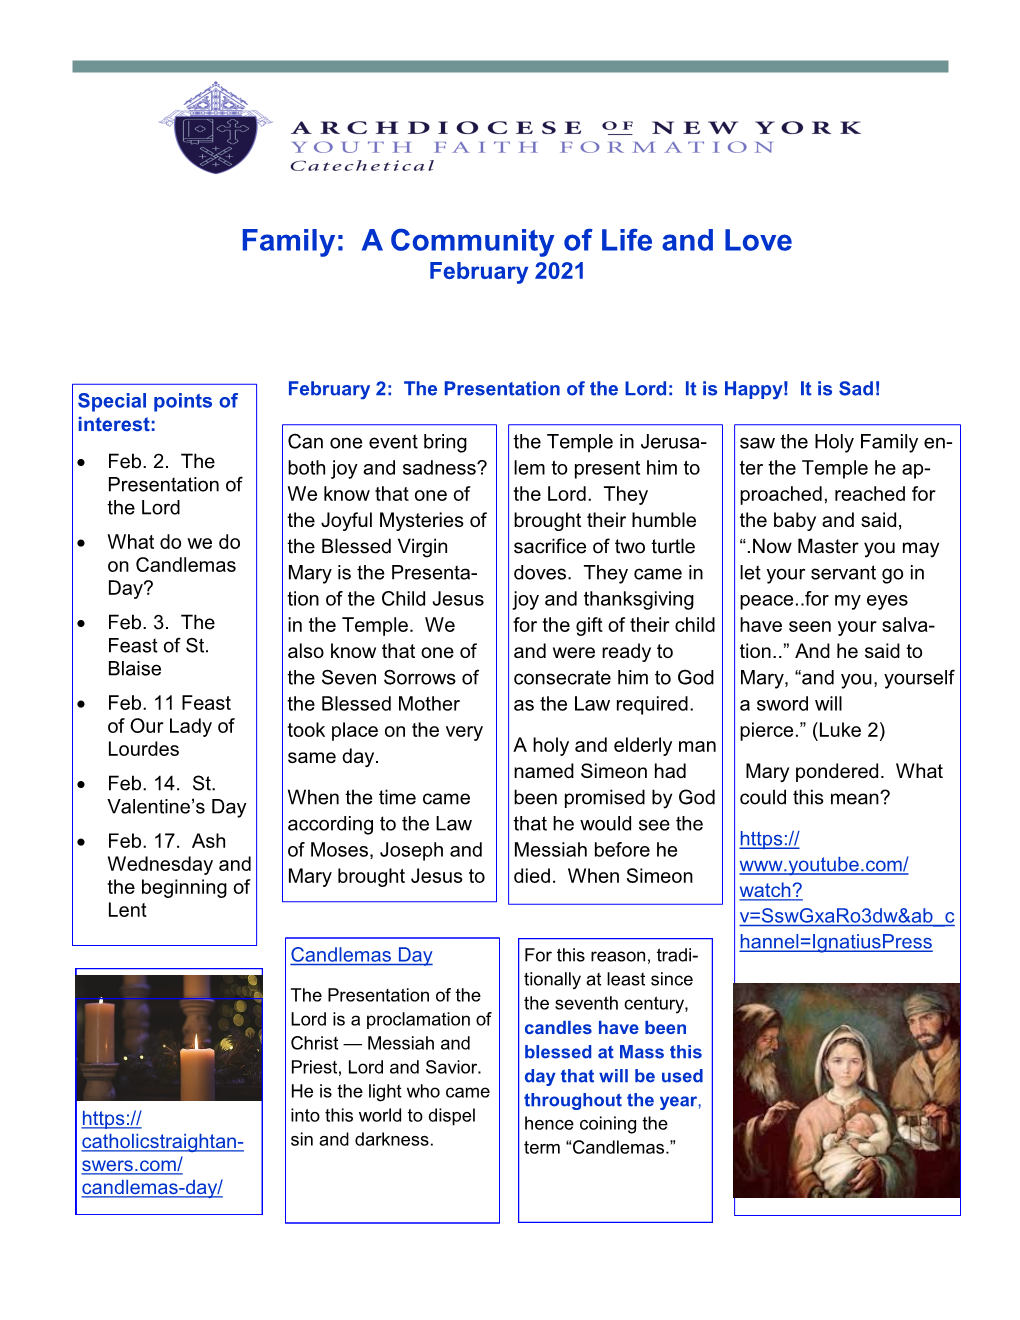 Family: a Community of Life and Love February 2021